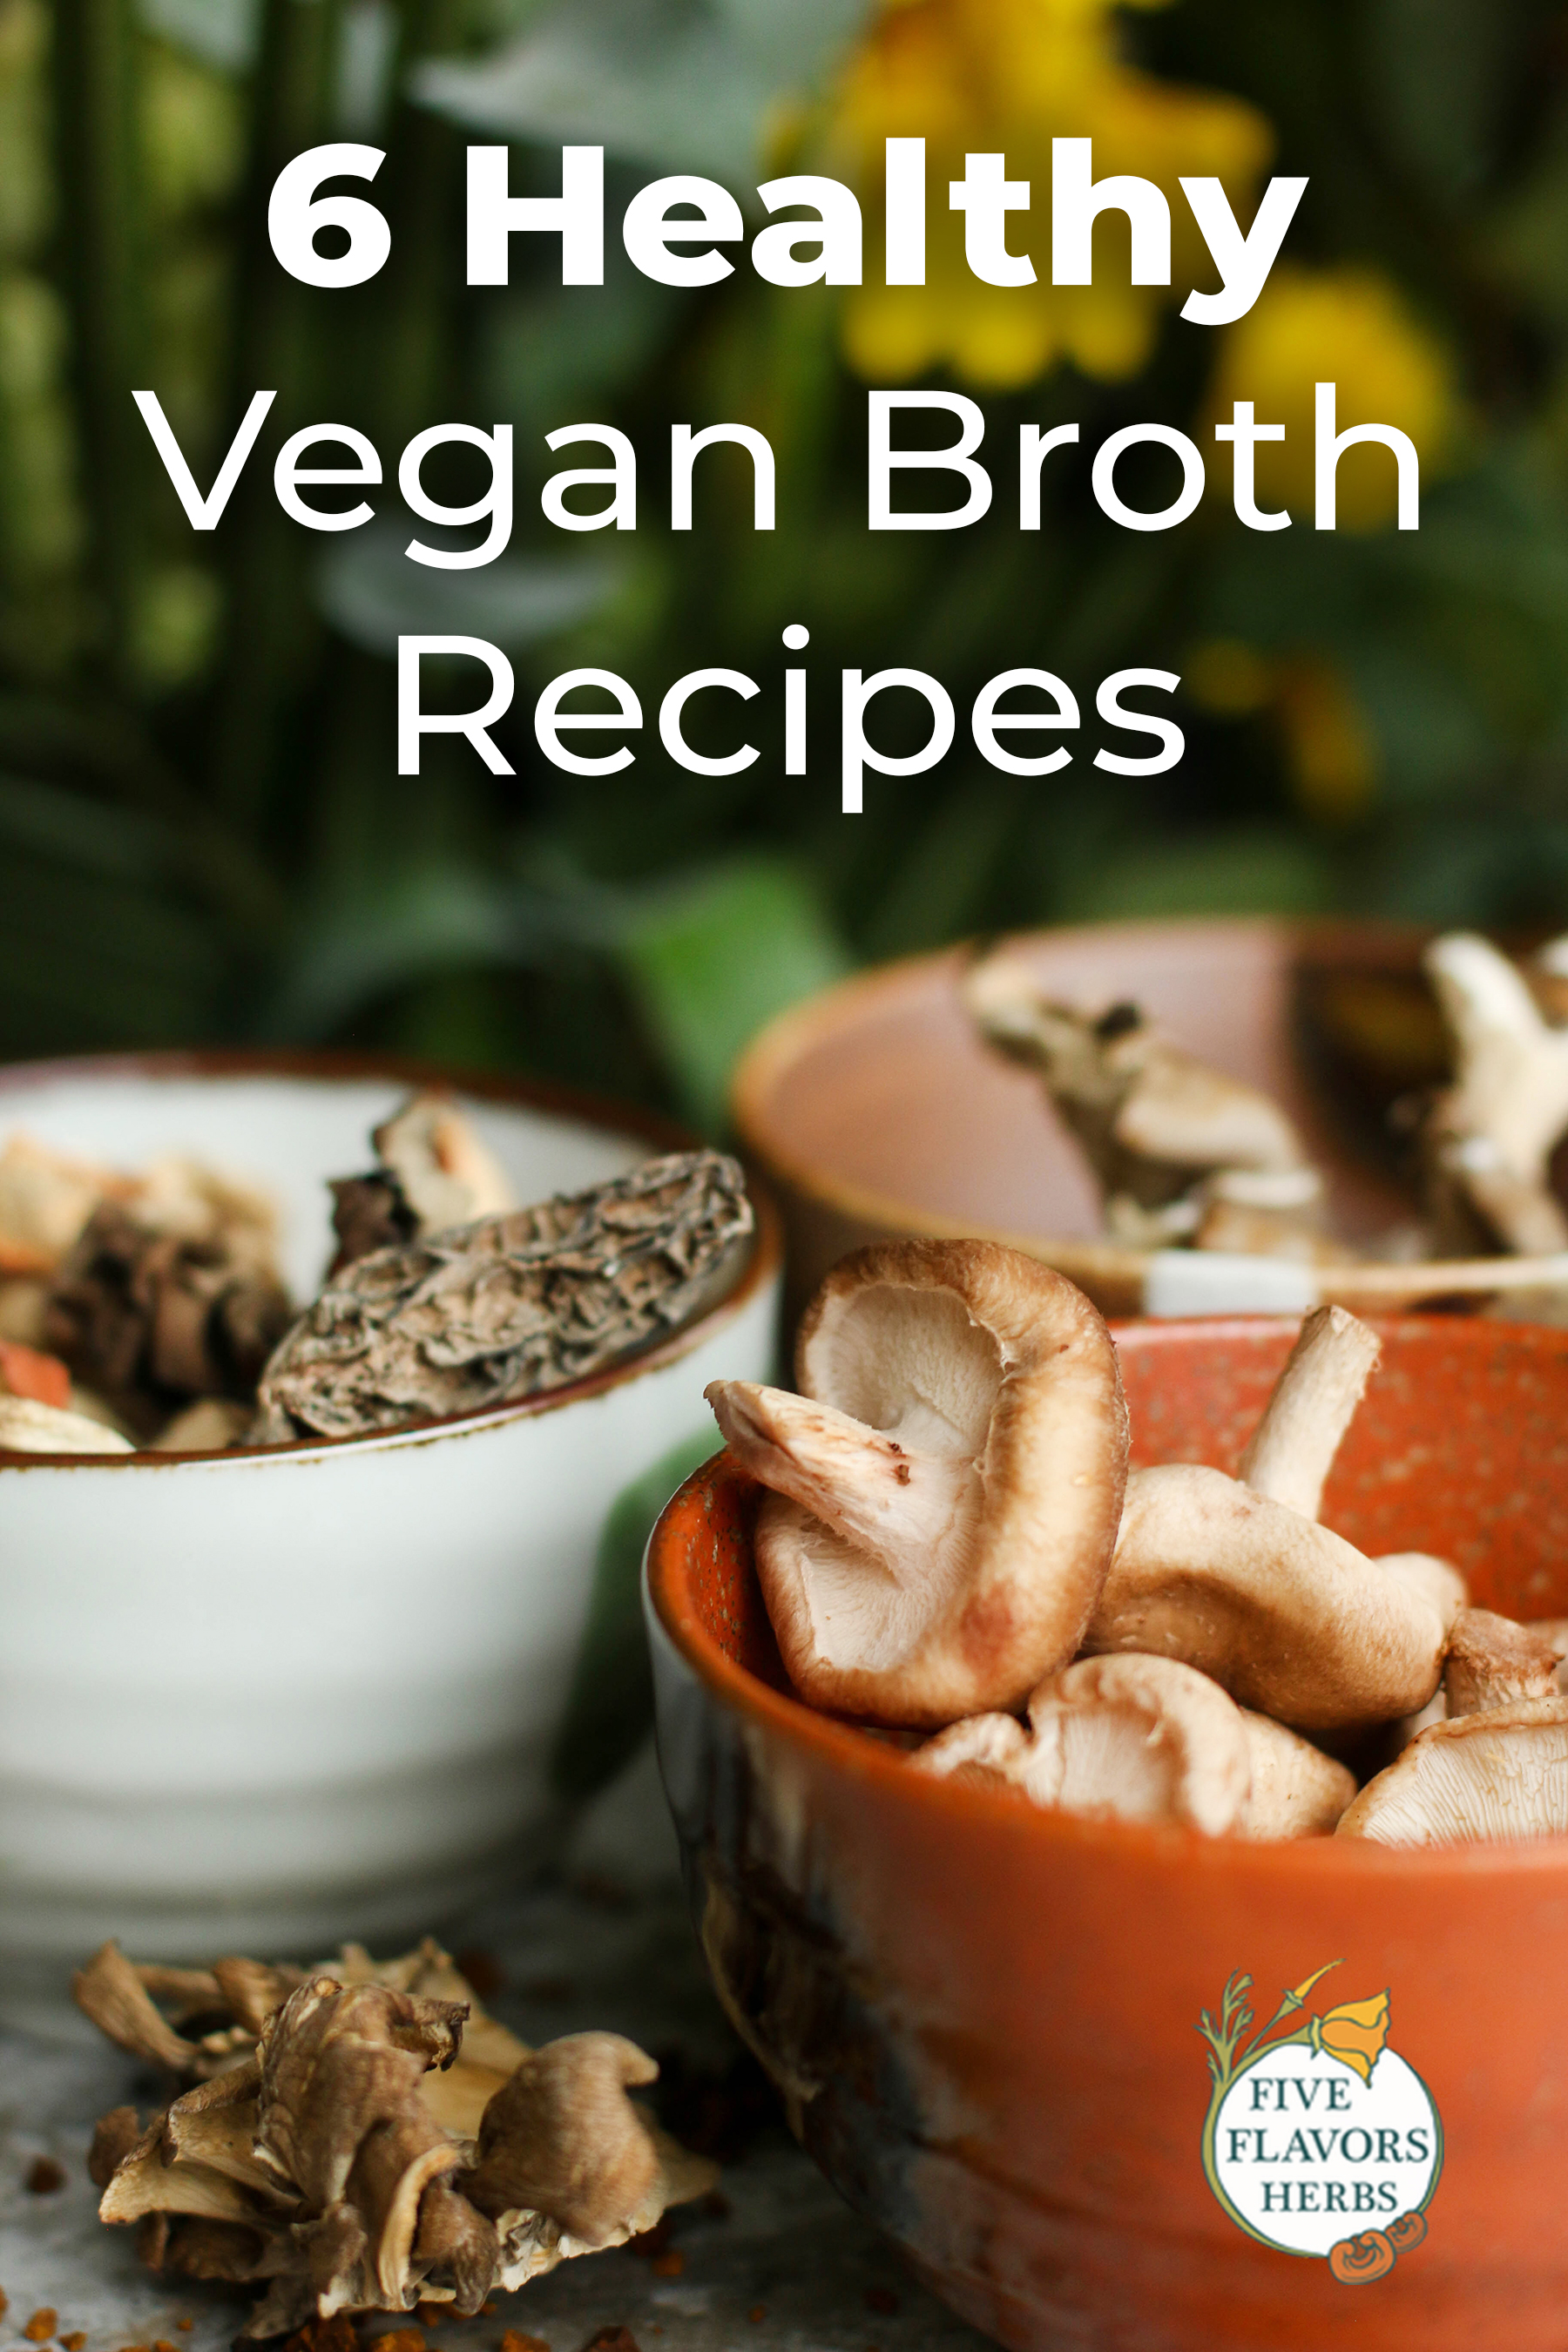 6-healthy-vegan-broth-recipes-from-five-flavors-herbs